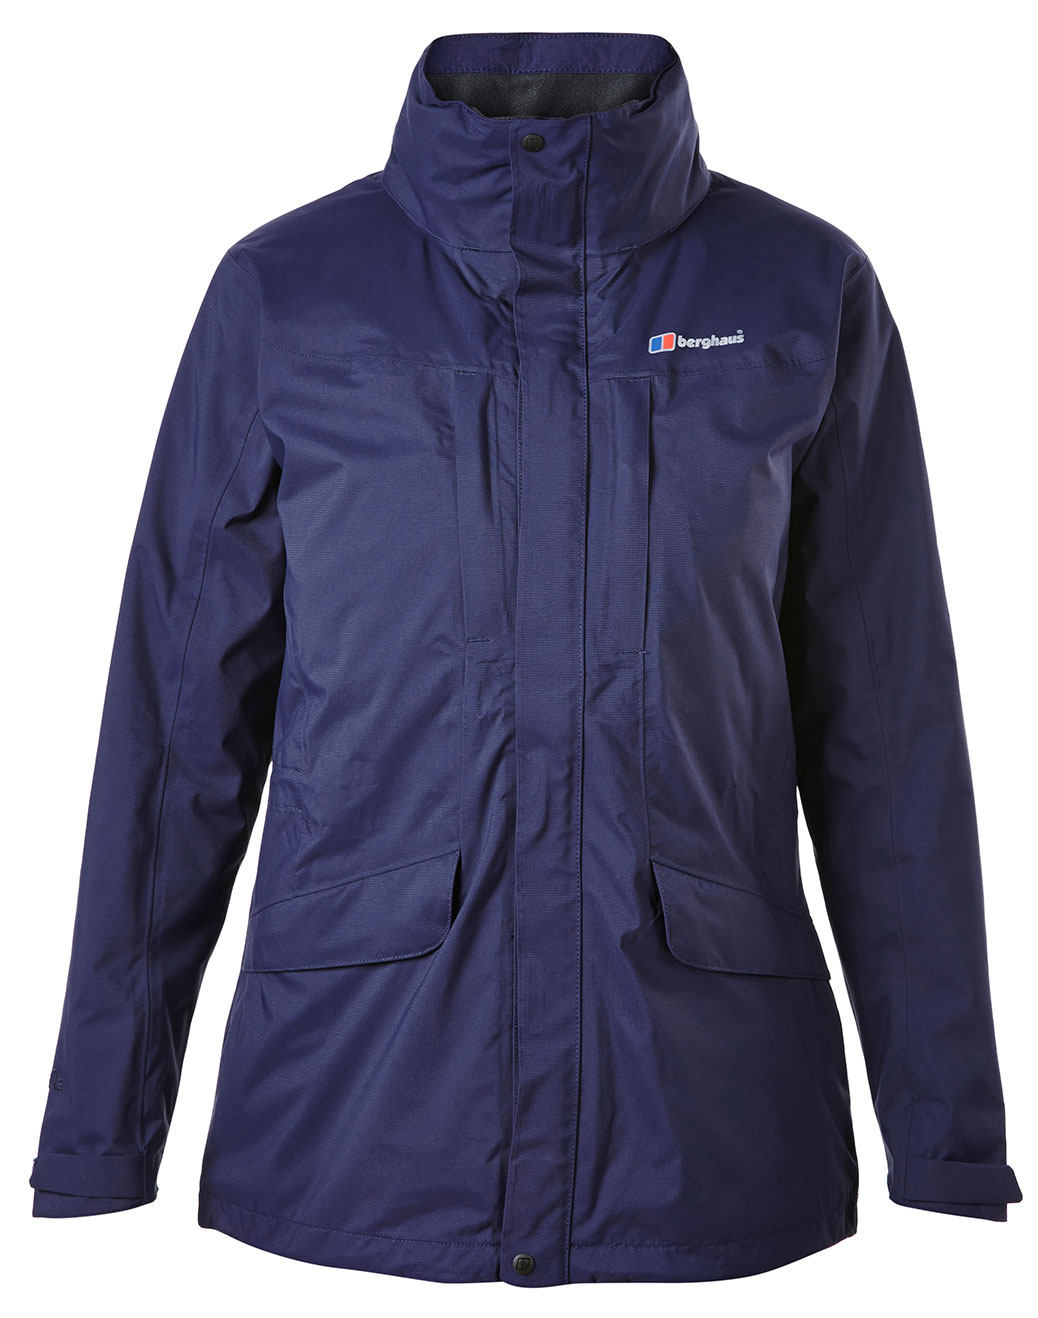 Berghaus Skiddaw Womens Waterproof Jacket for fuller coverage protection